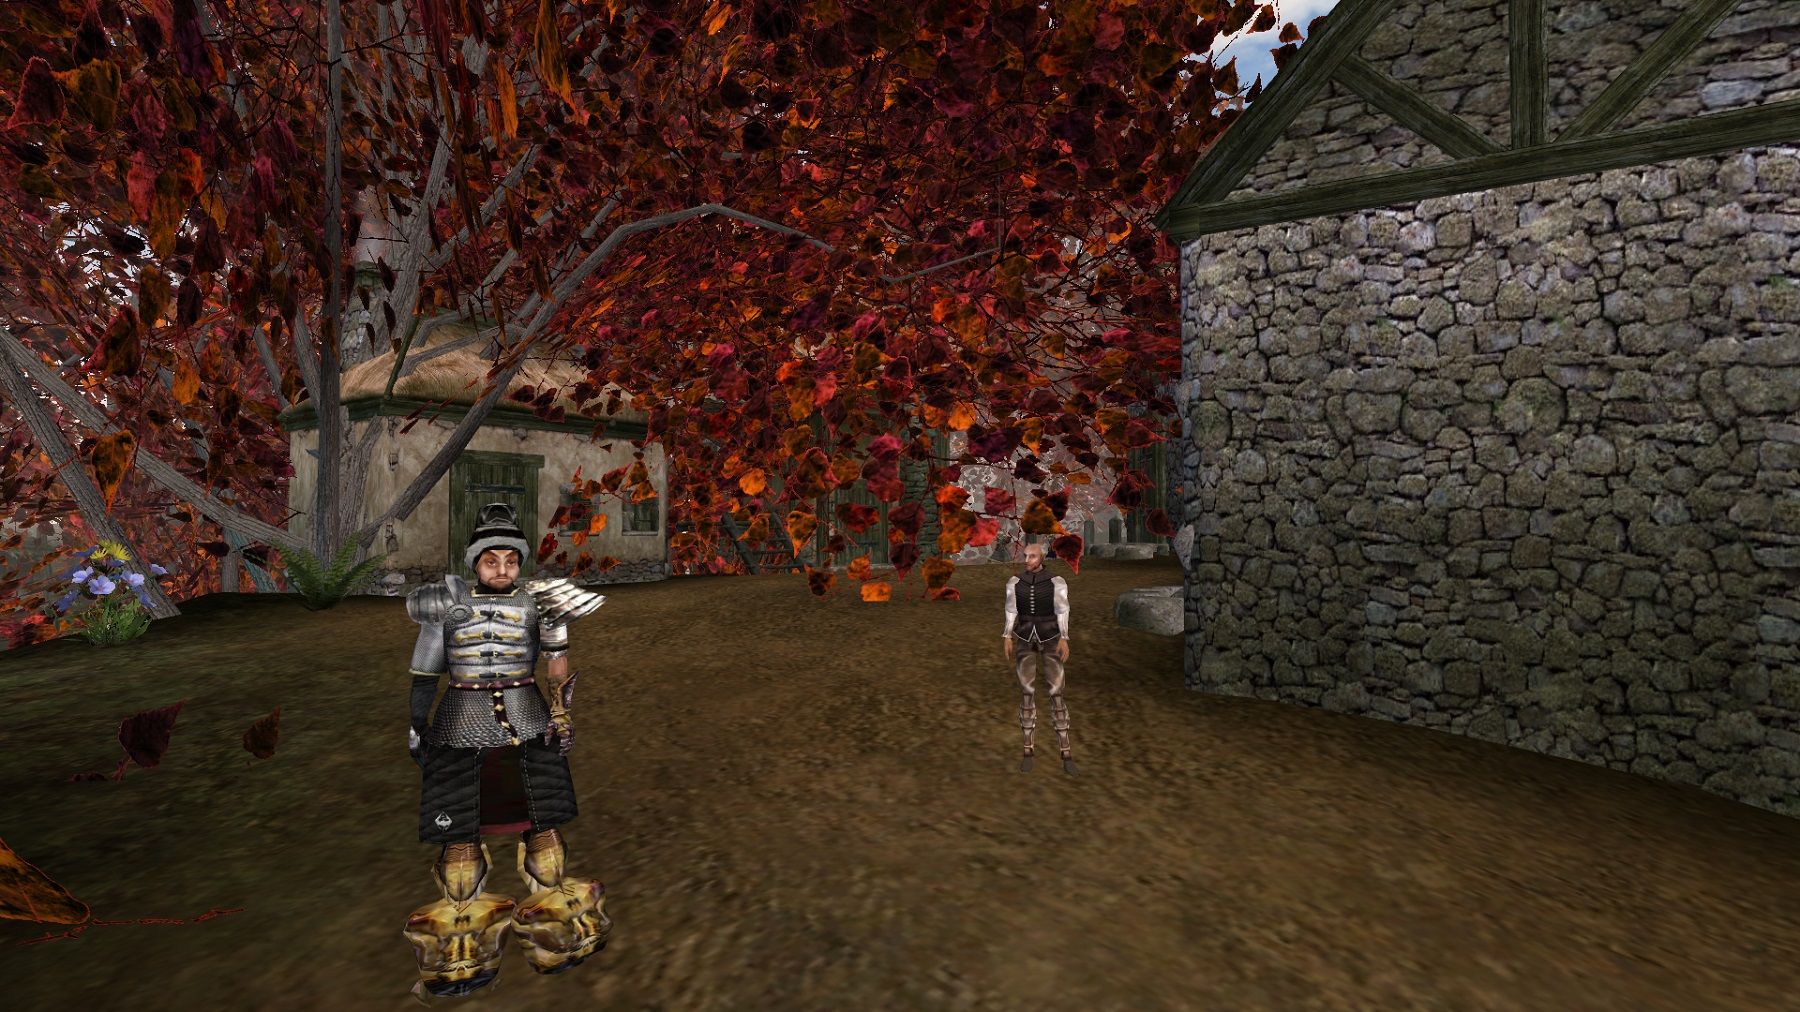 Image from Morrowind showing the village of Seyda Neen witha huge red train the middle.